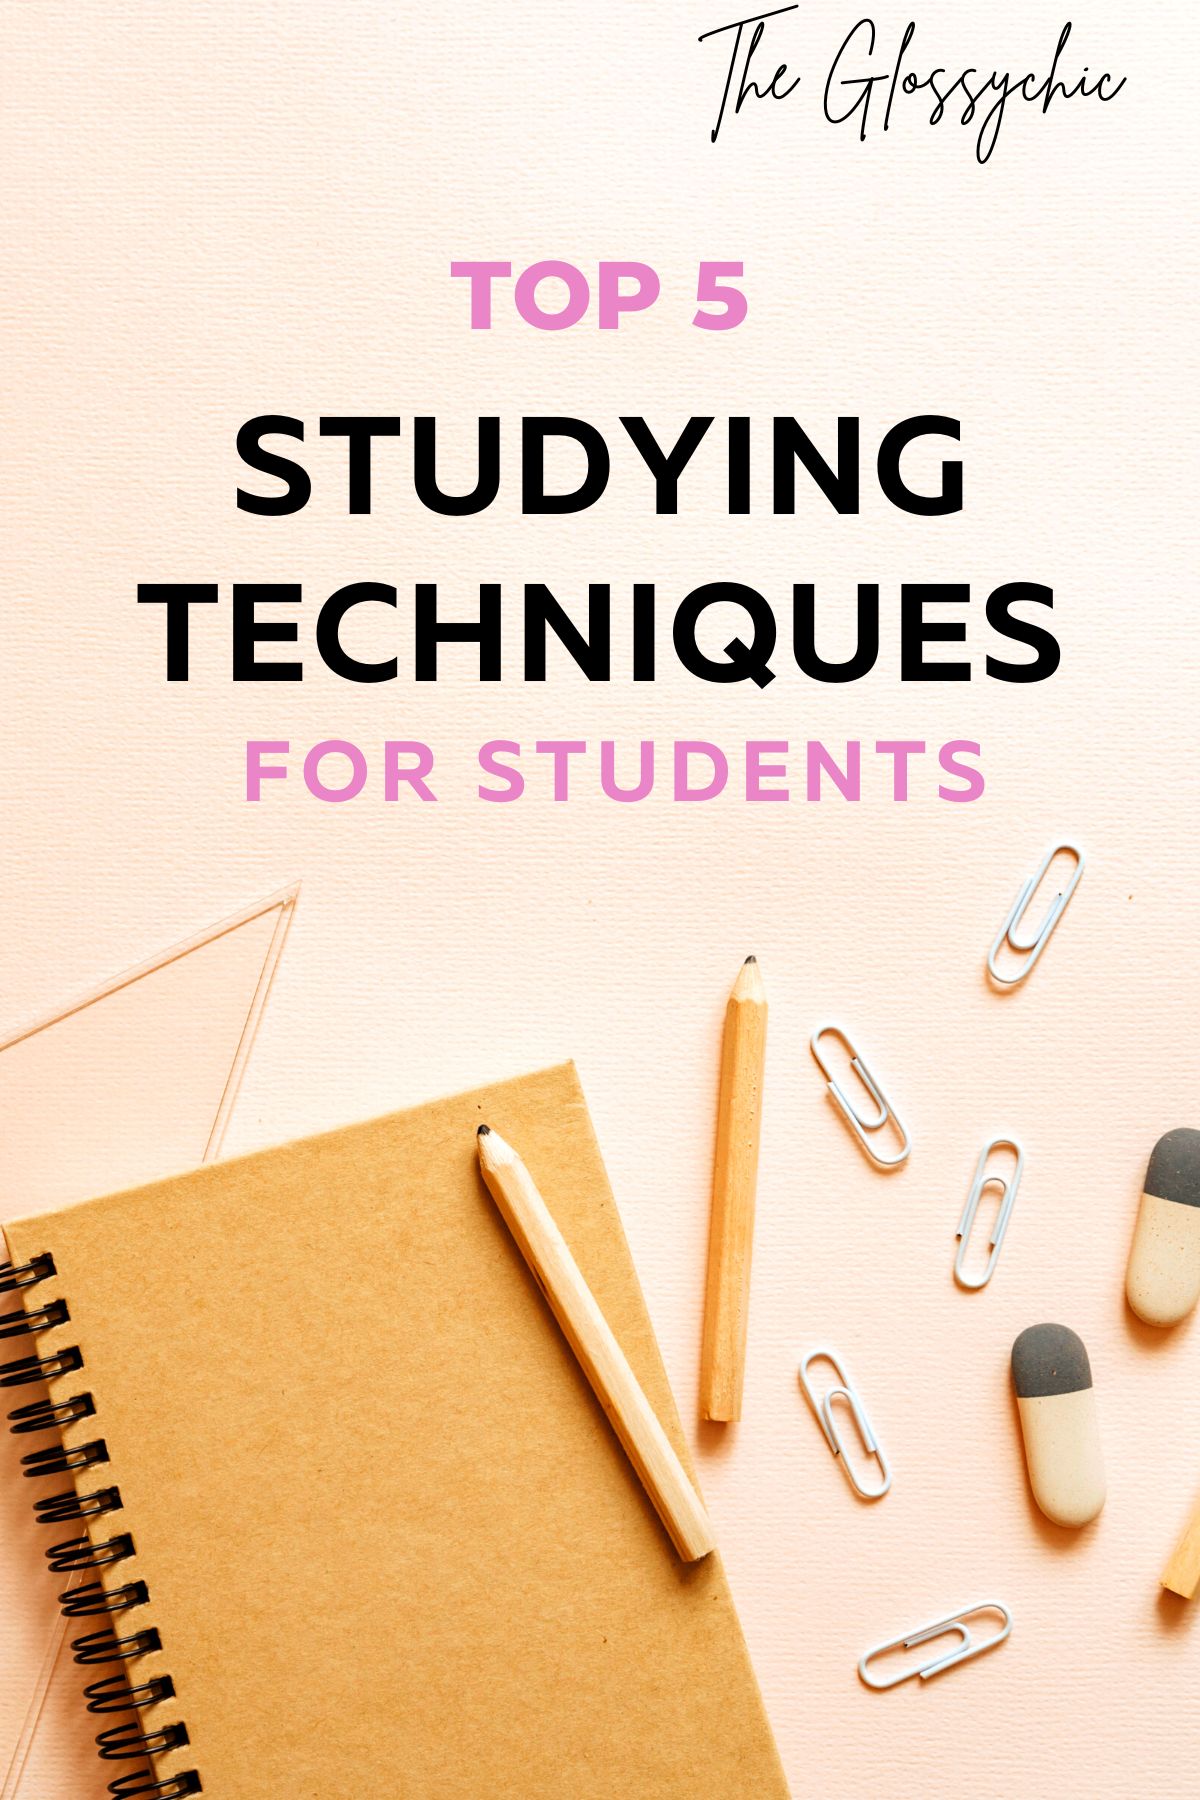 Top 5 Studying Techniques For Students